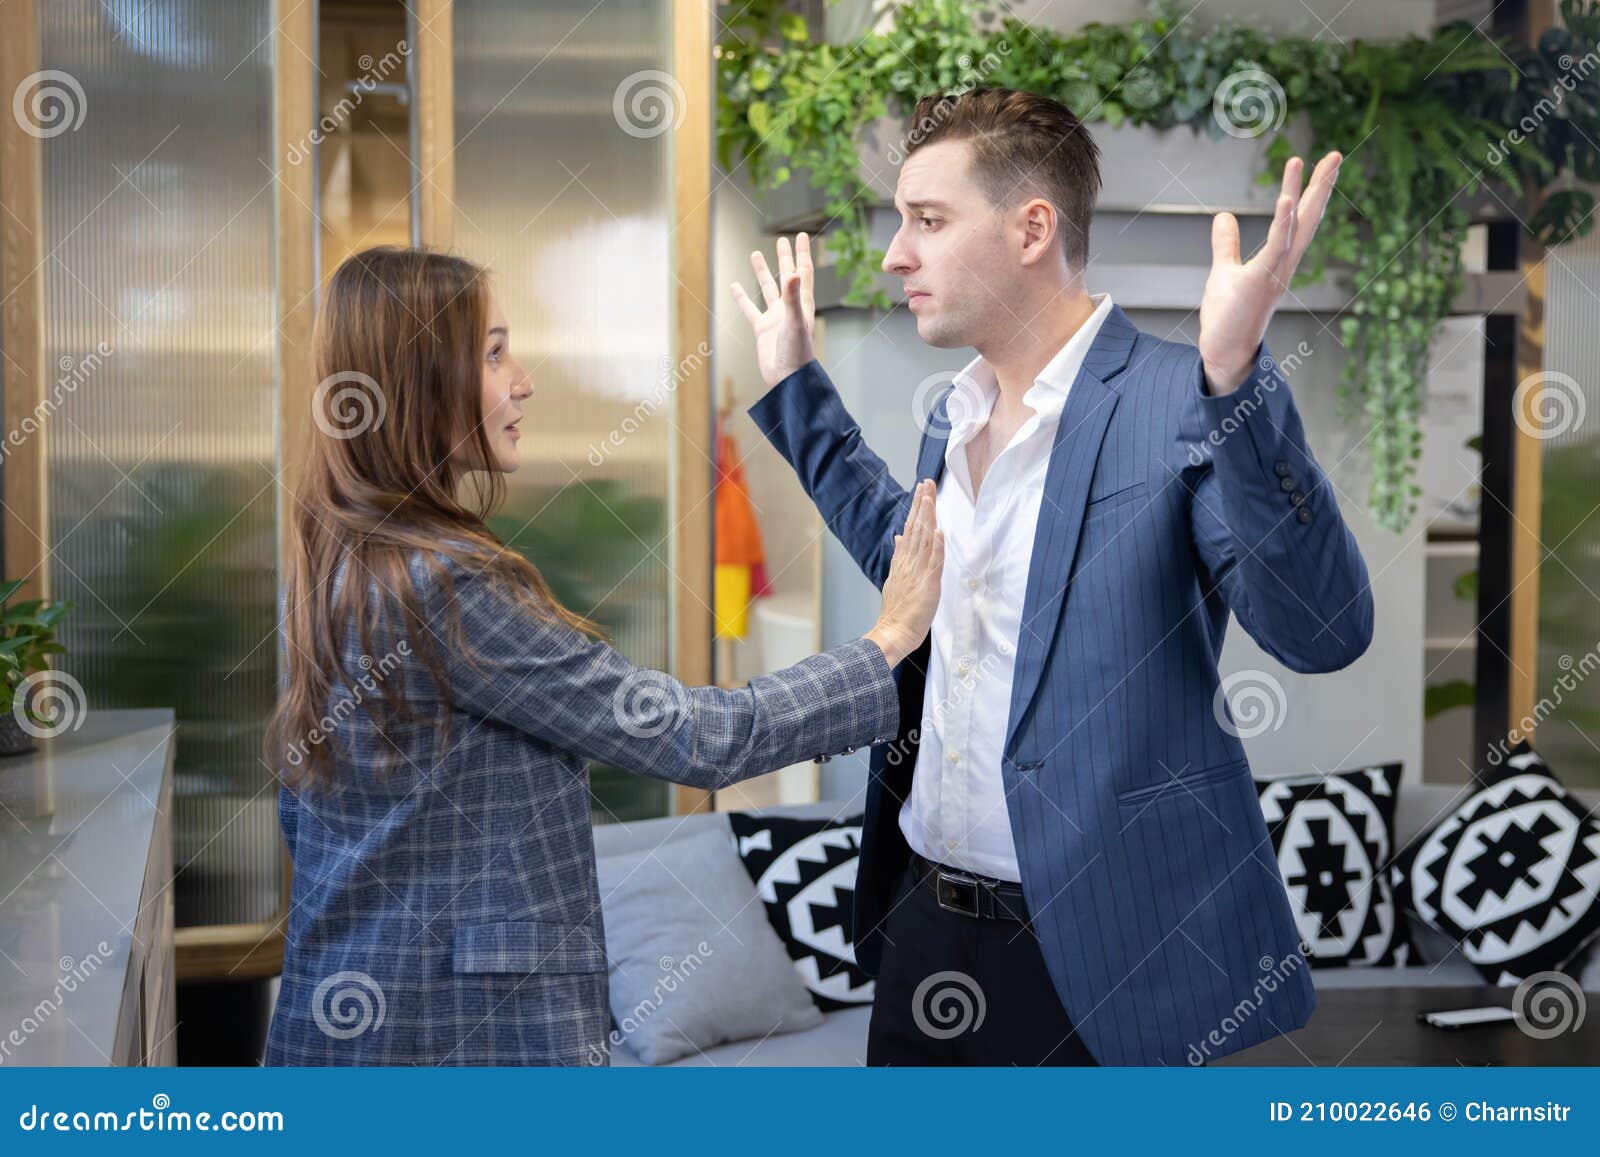 caucasian man in suit have a quarrel with his wife or his collegue